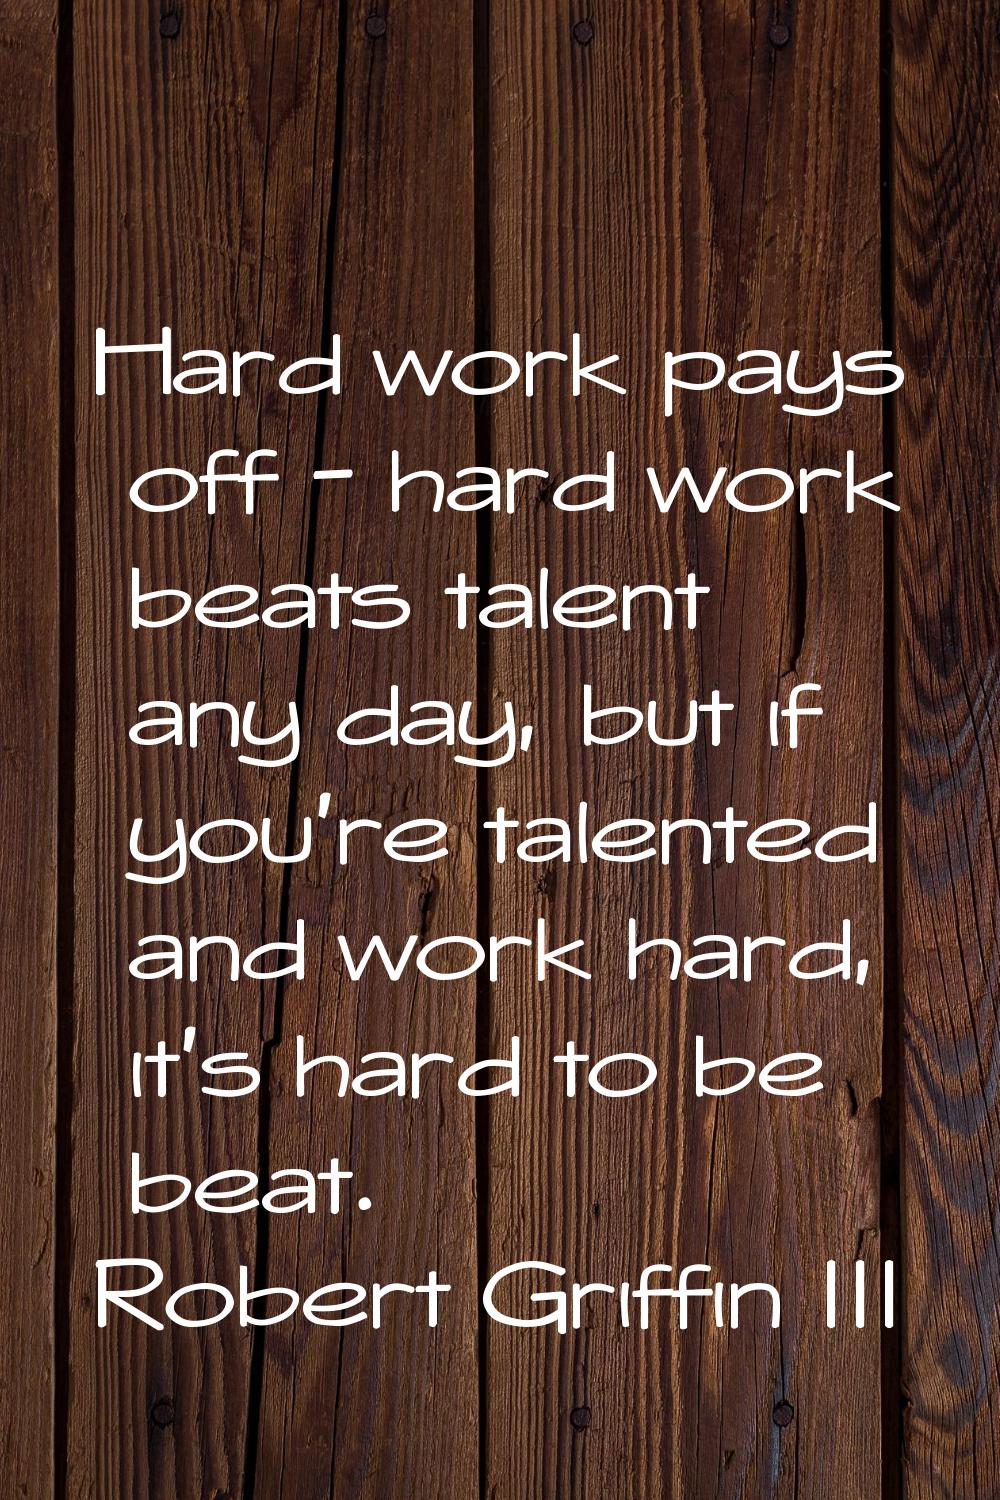 Hard work pays off - hard work beats talent any day, but if you're talented and work hard, it's har